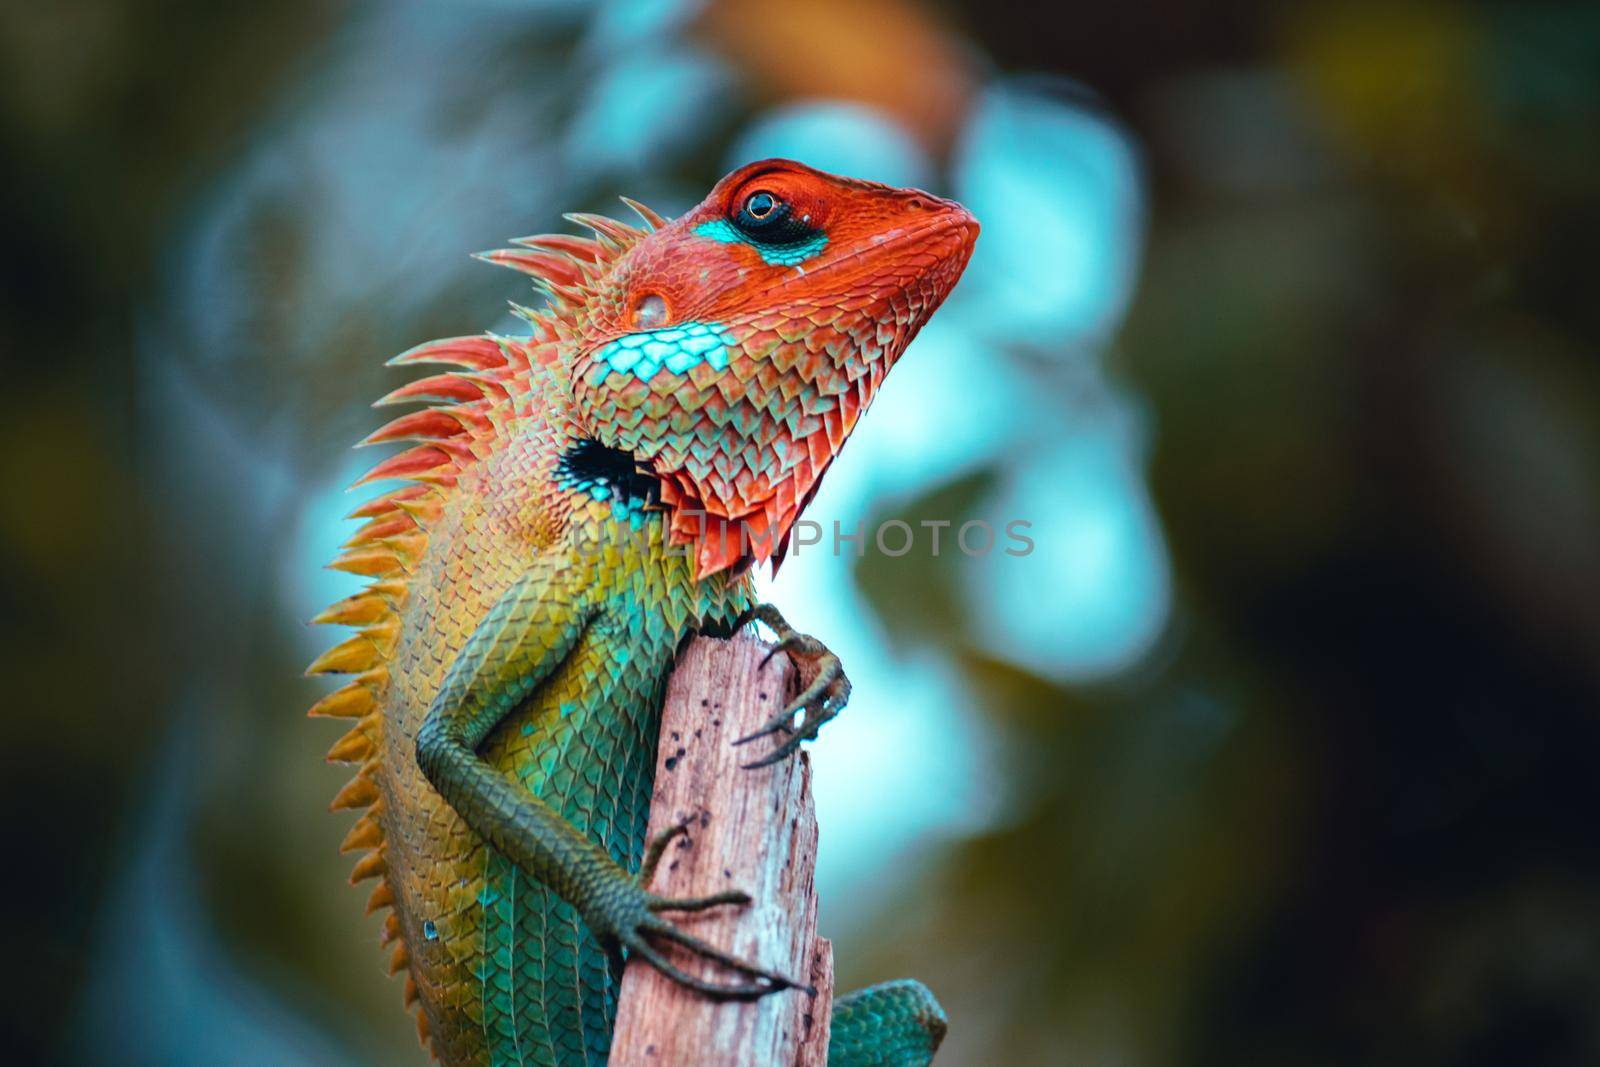 Green garden lizard showed up for a photoshoot, resting in a wooden pole, curious lizard looking at camera wondering head high, arrogant and stubborn attitude, colorful changeable bright gradient skin by nilanka